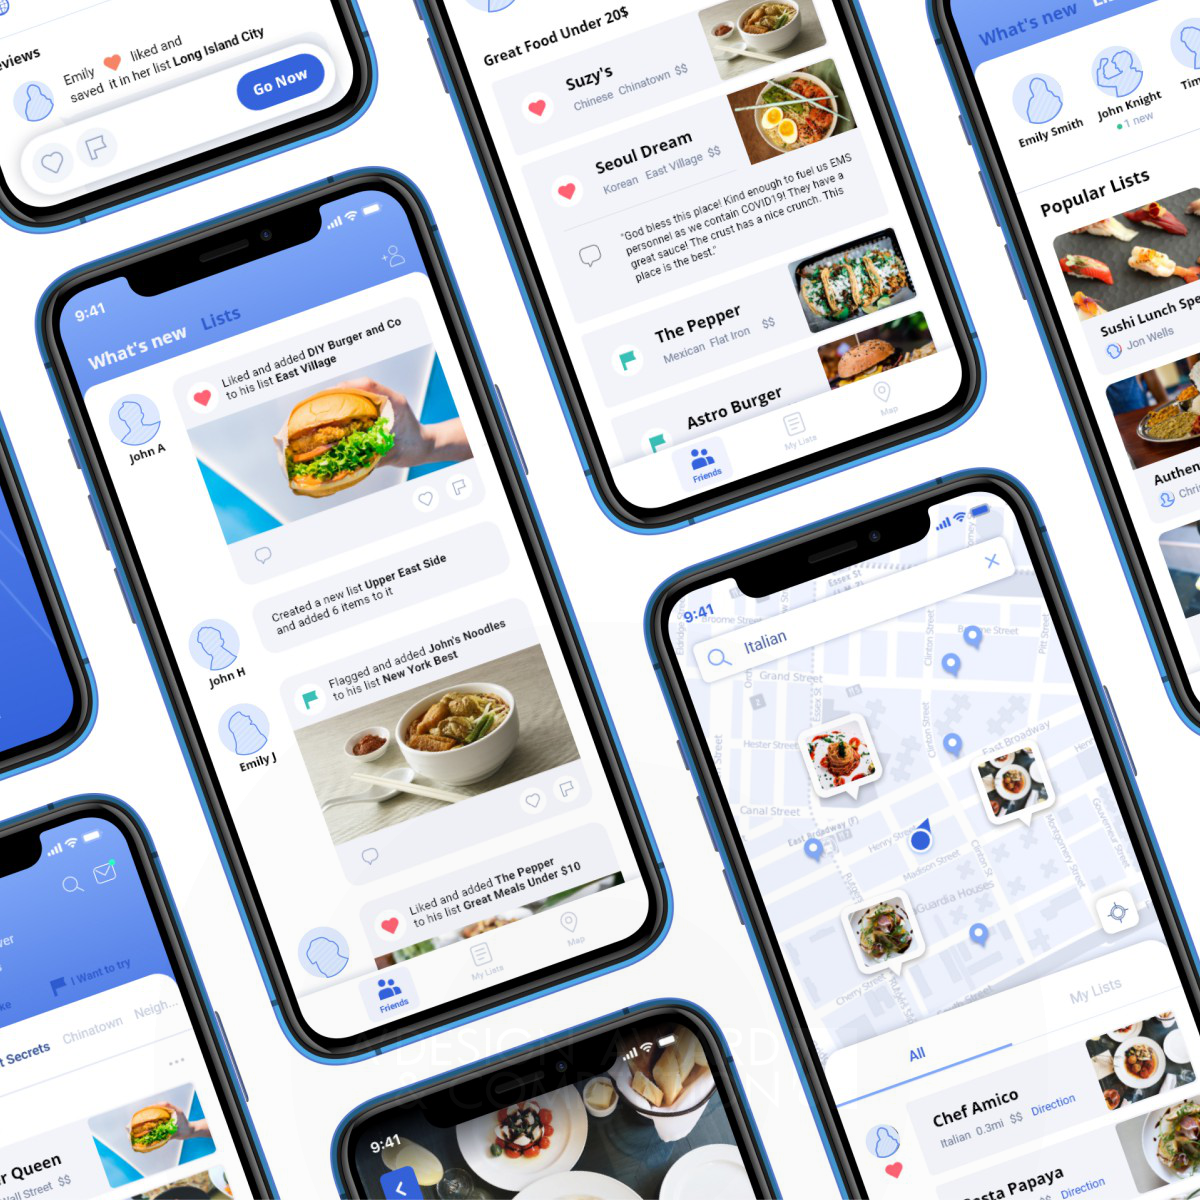 Foodie Restaurant Recommendation Service by Tianyi Qi